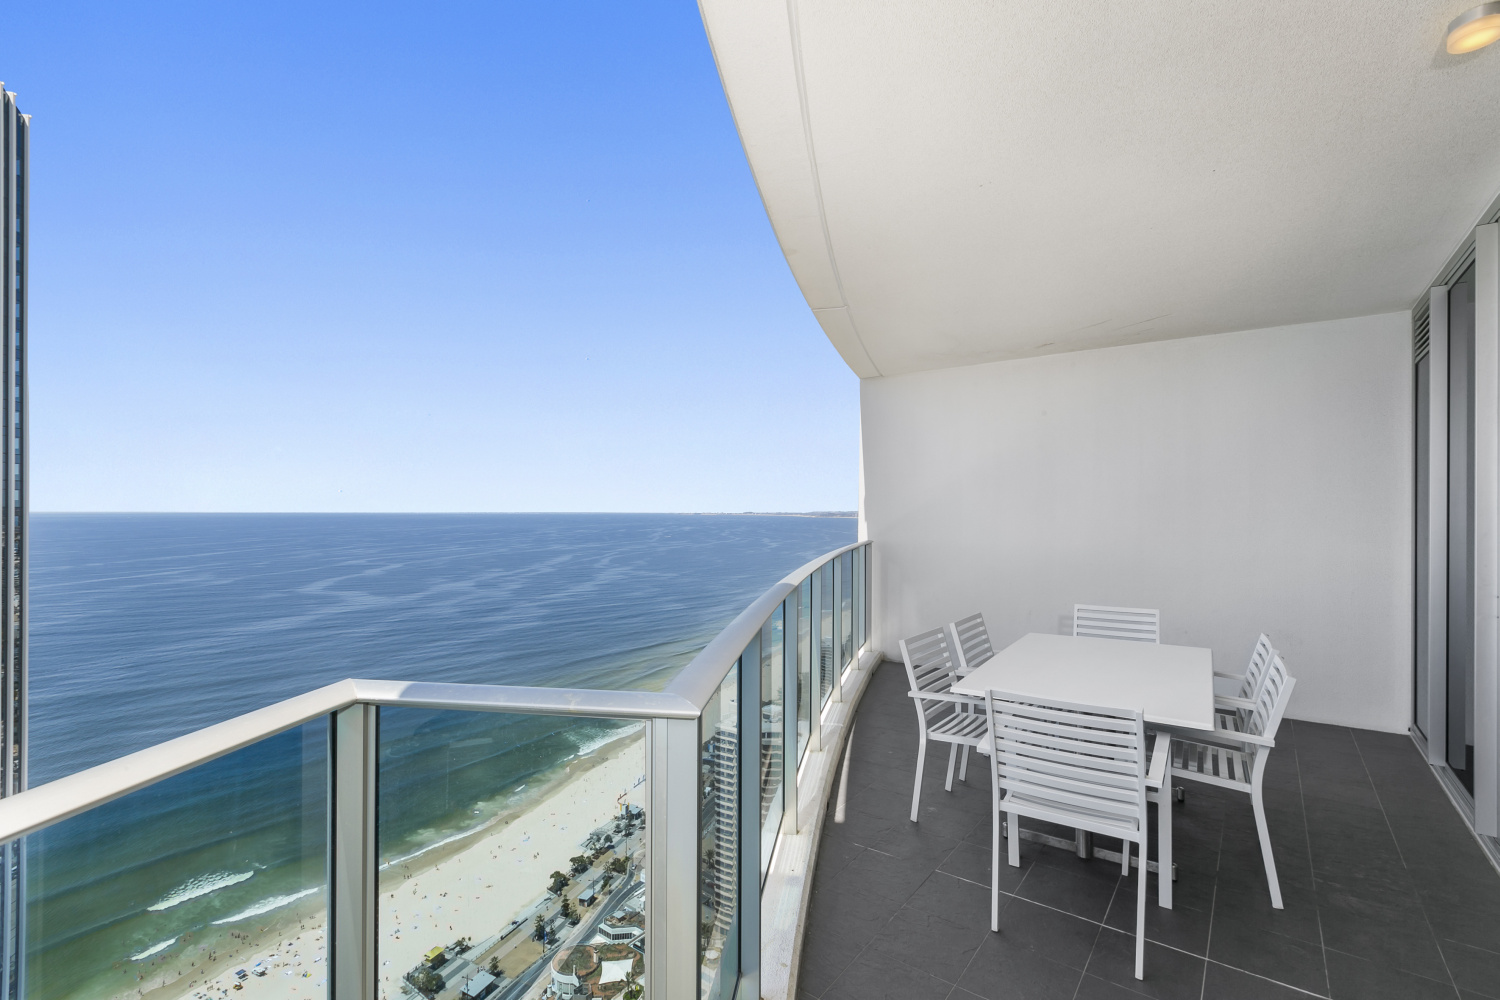 Enjoy the views from your own balcony